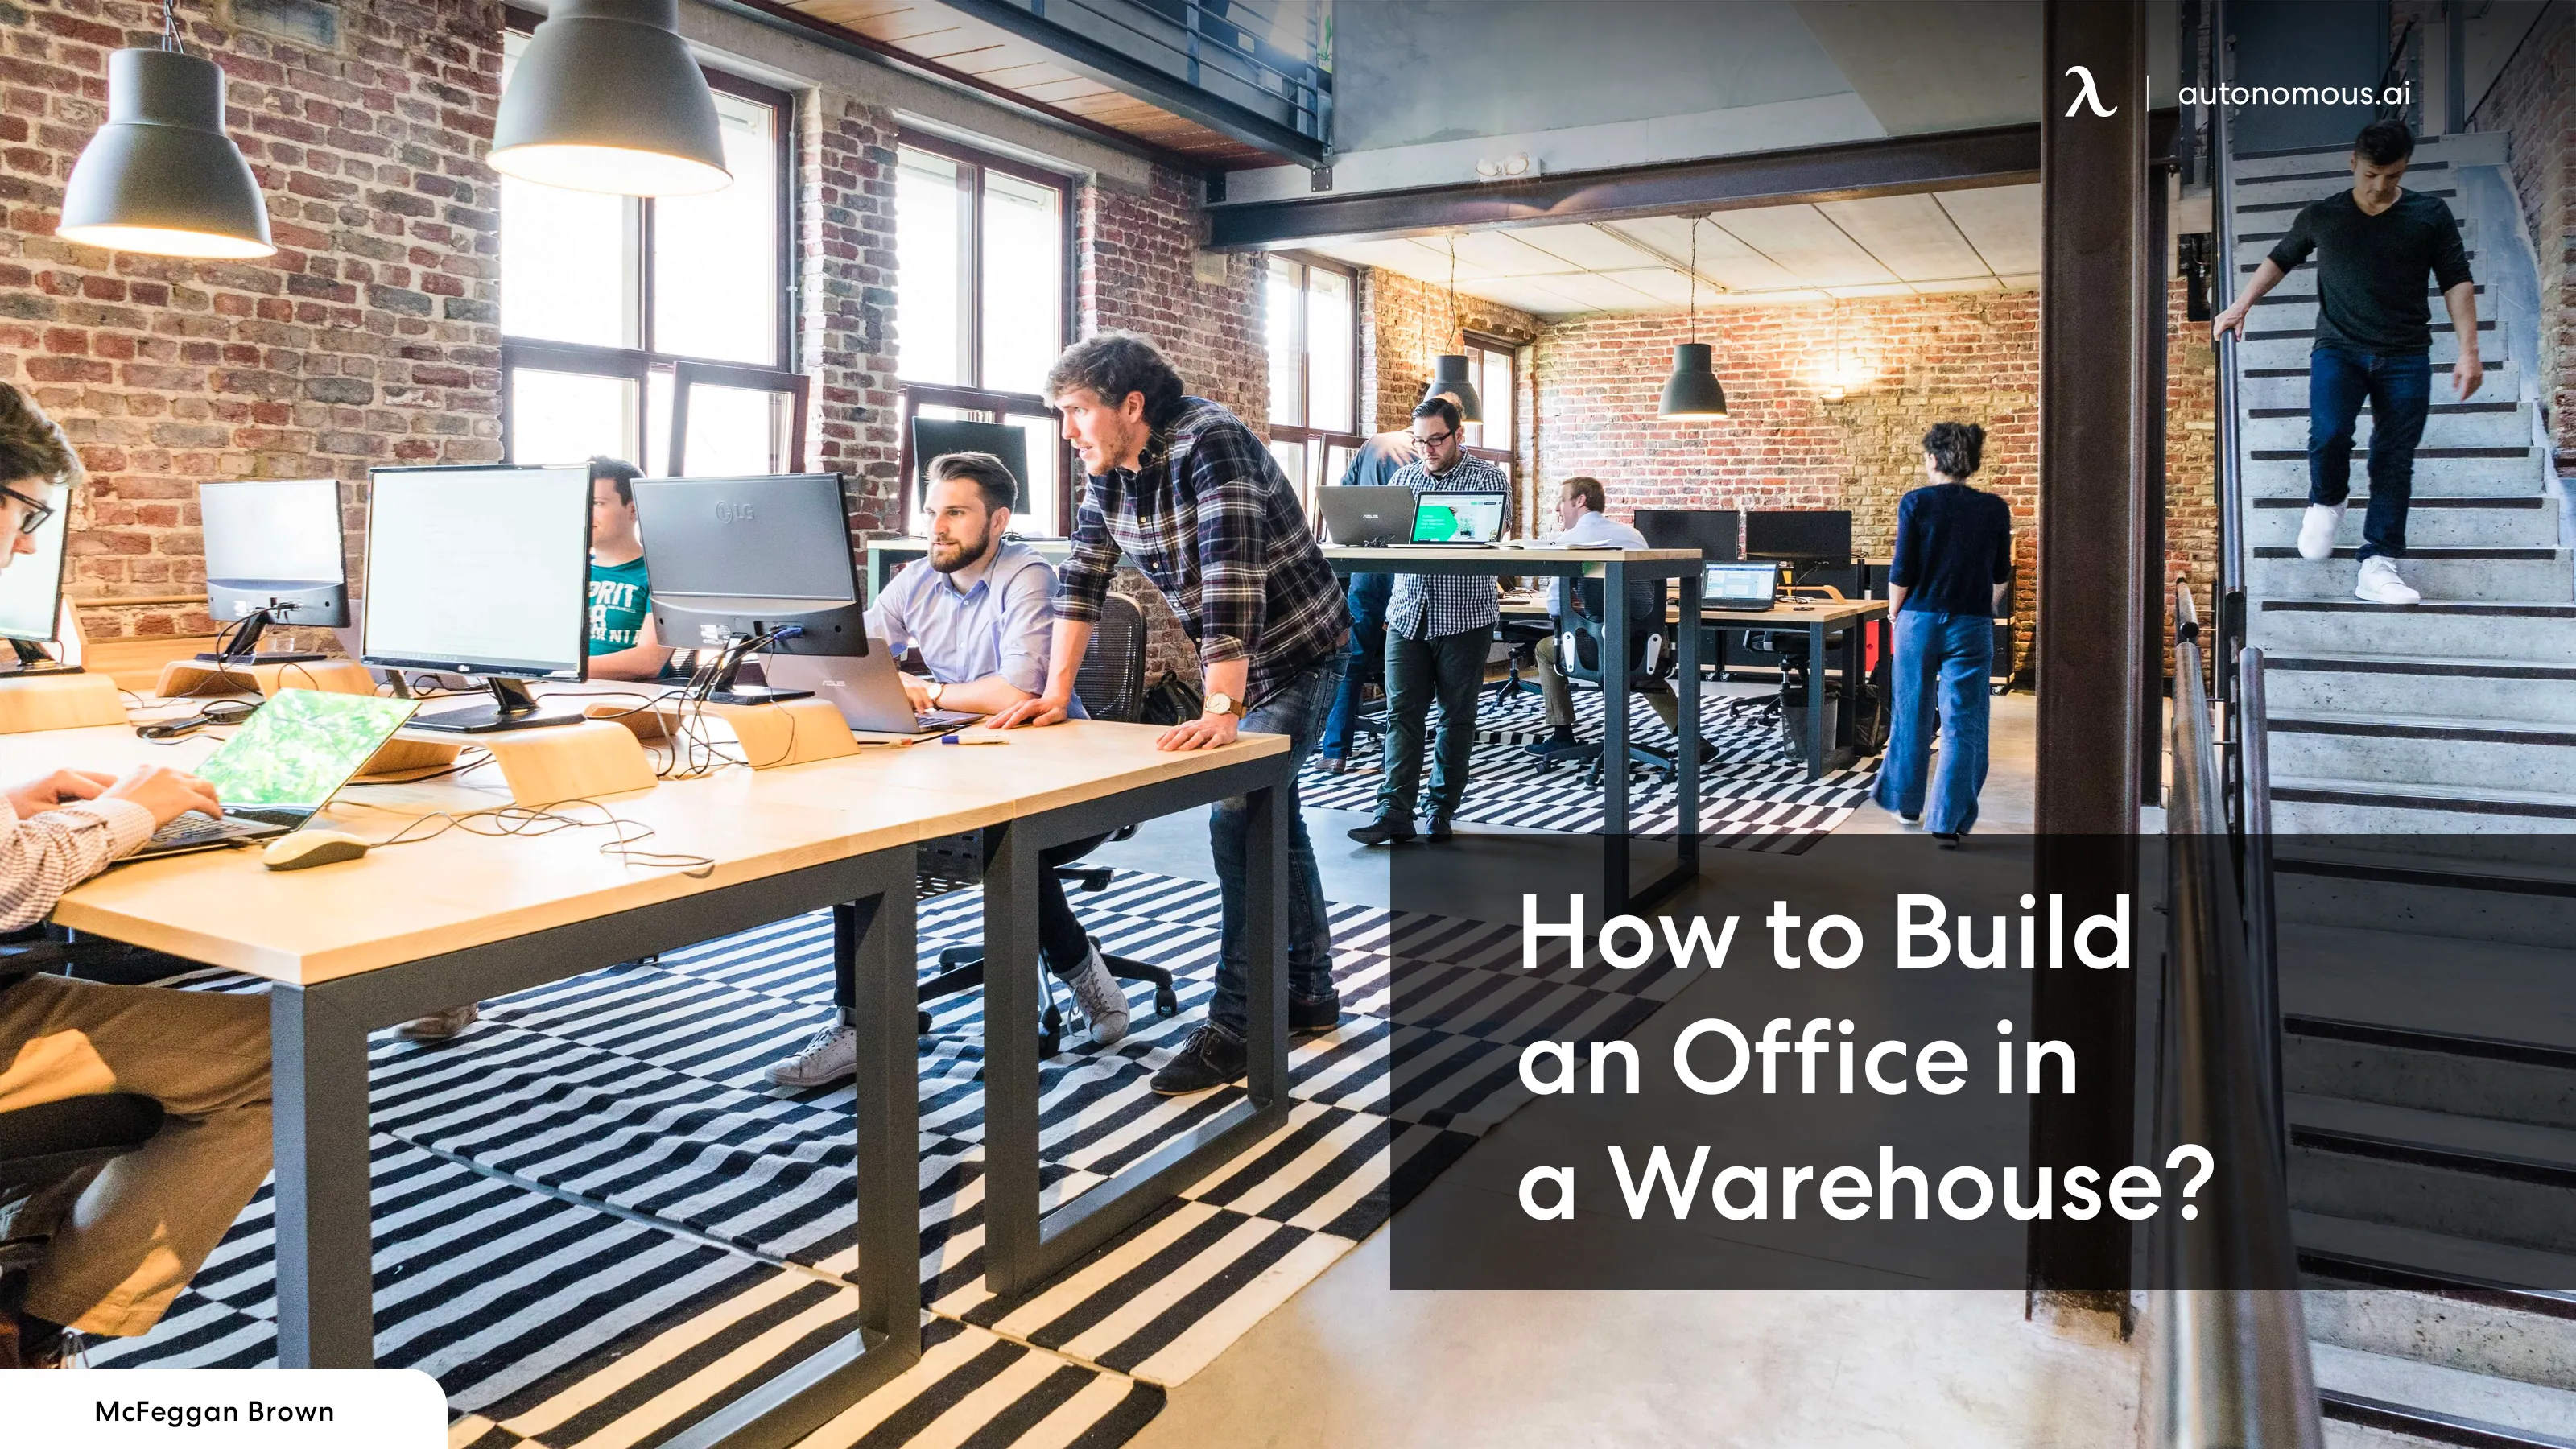 Maximize Your Space with Warehouse Office Design: Tips & Strategies